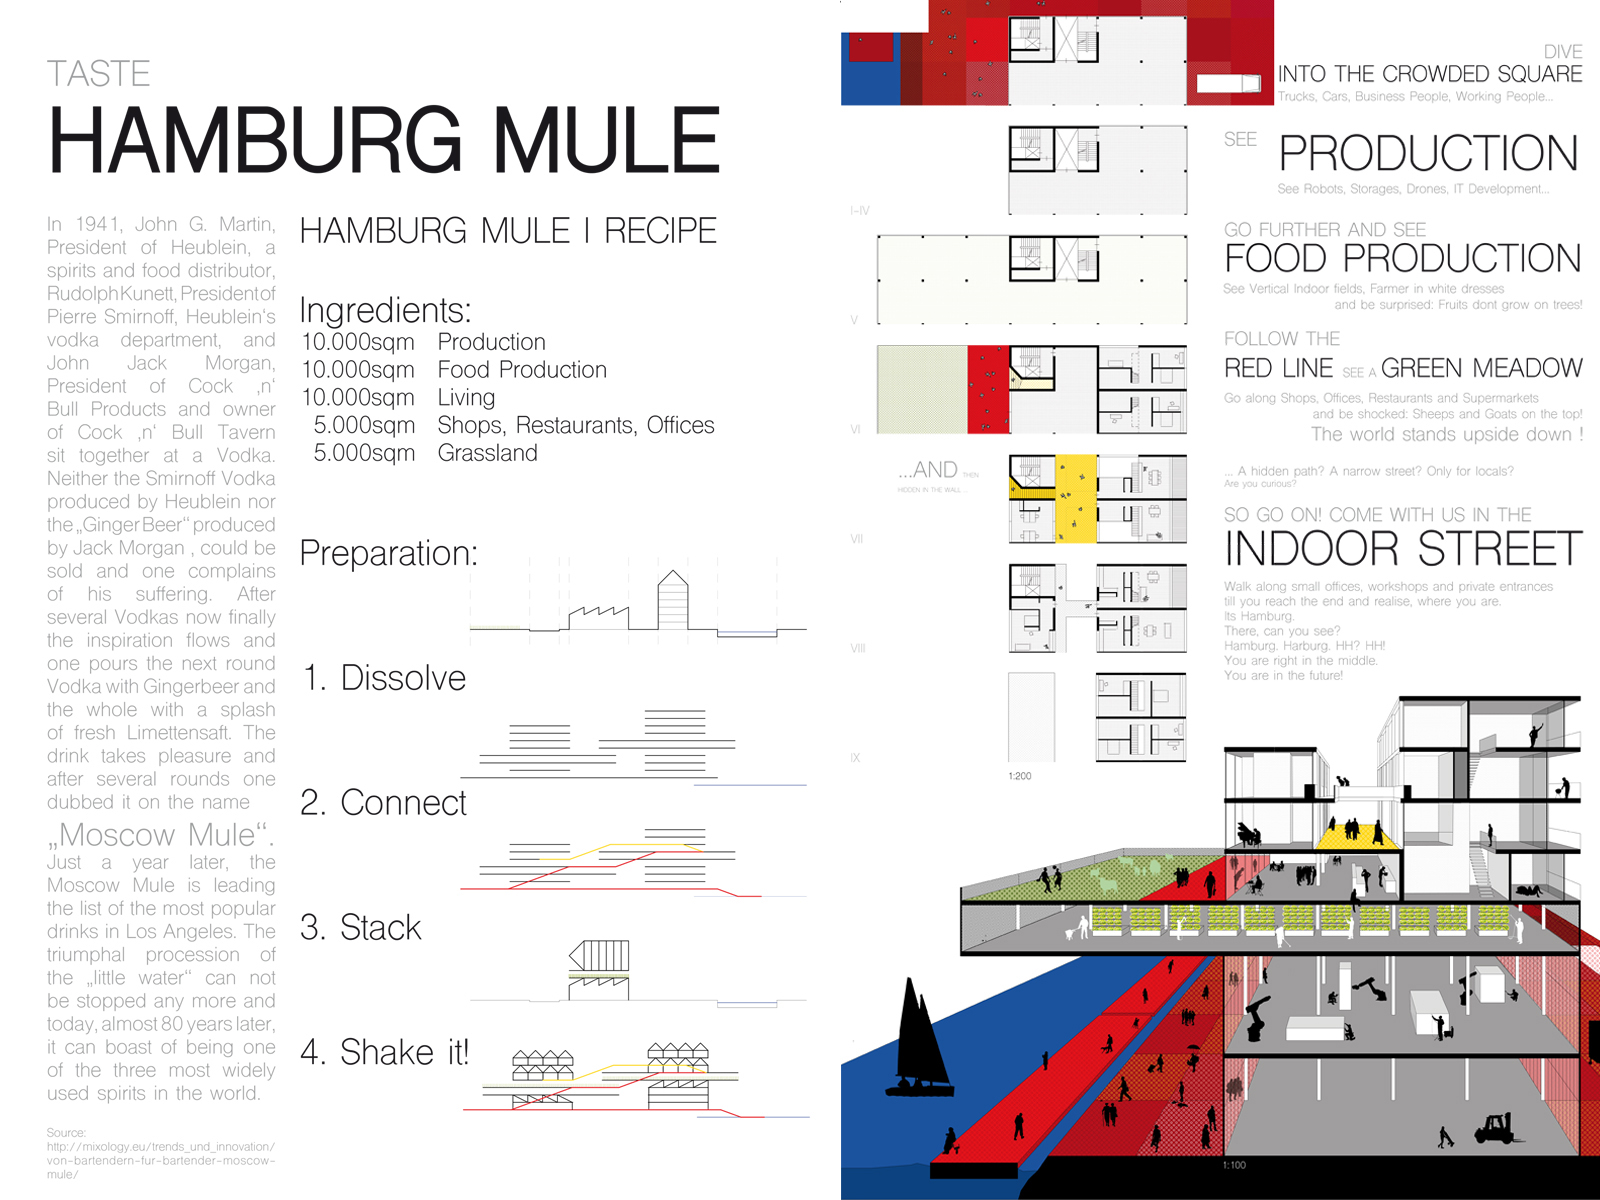  Competition EUROPAN 14 - Recognition | Amelie Rost